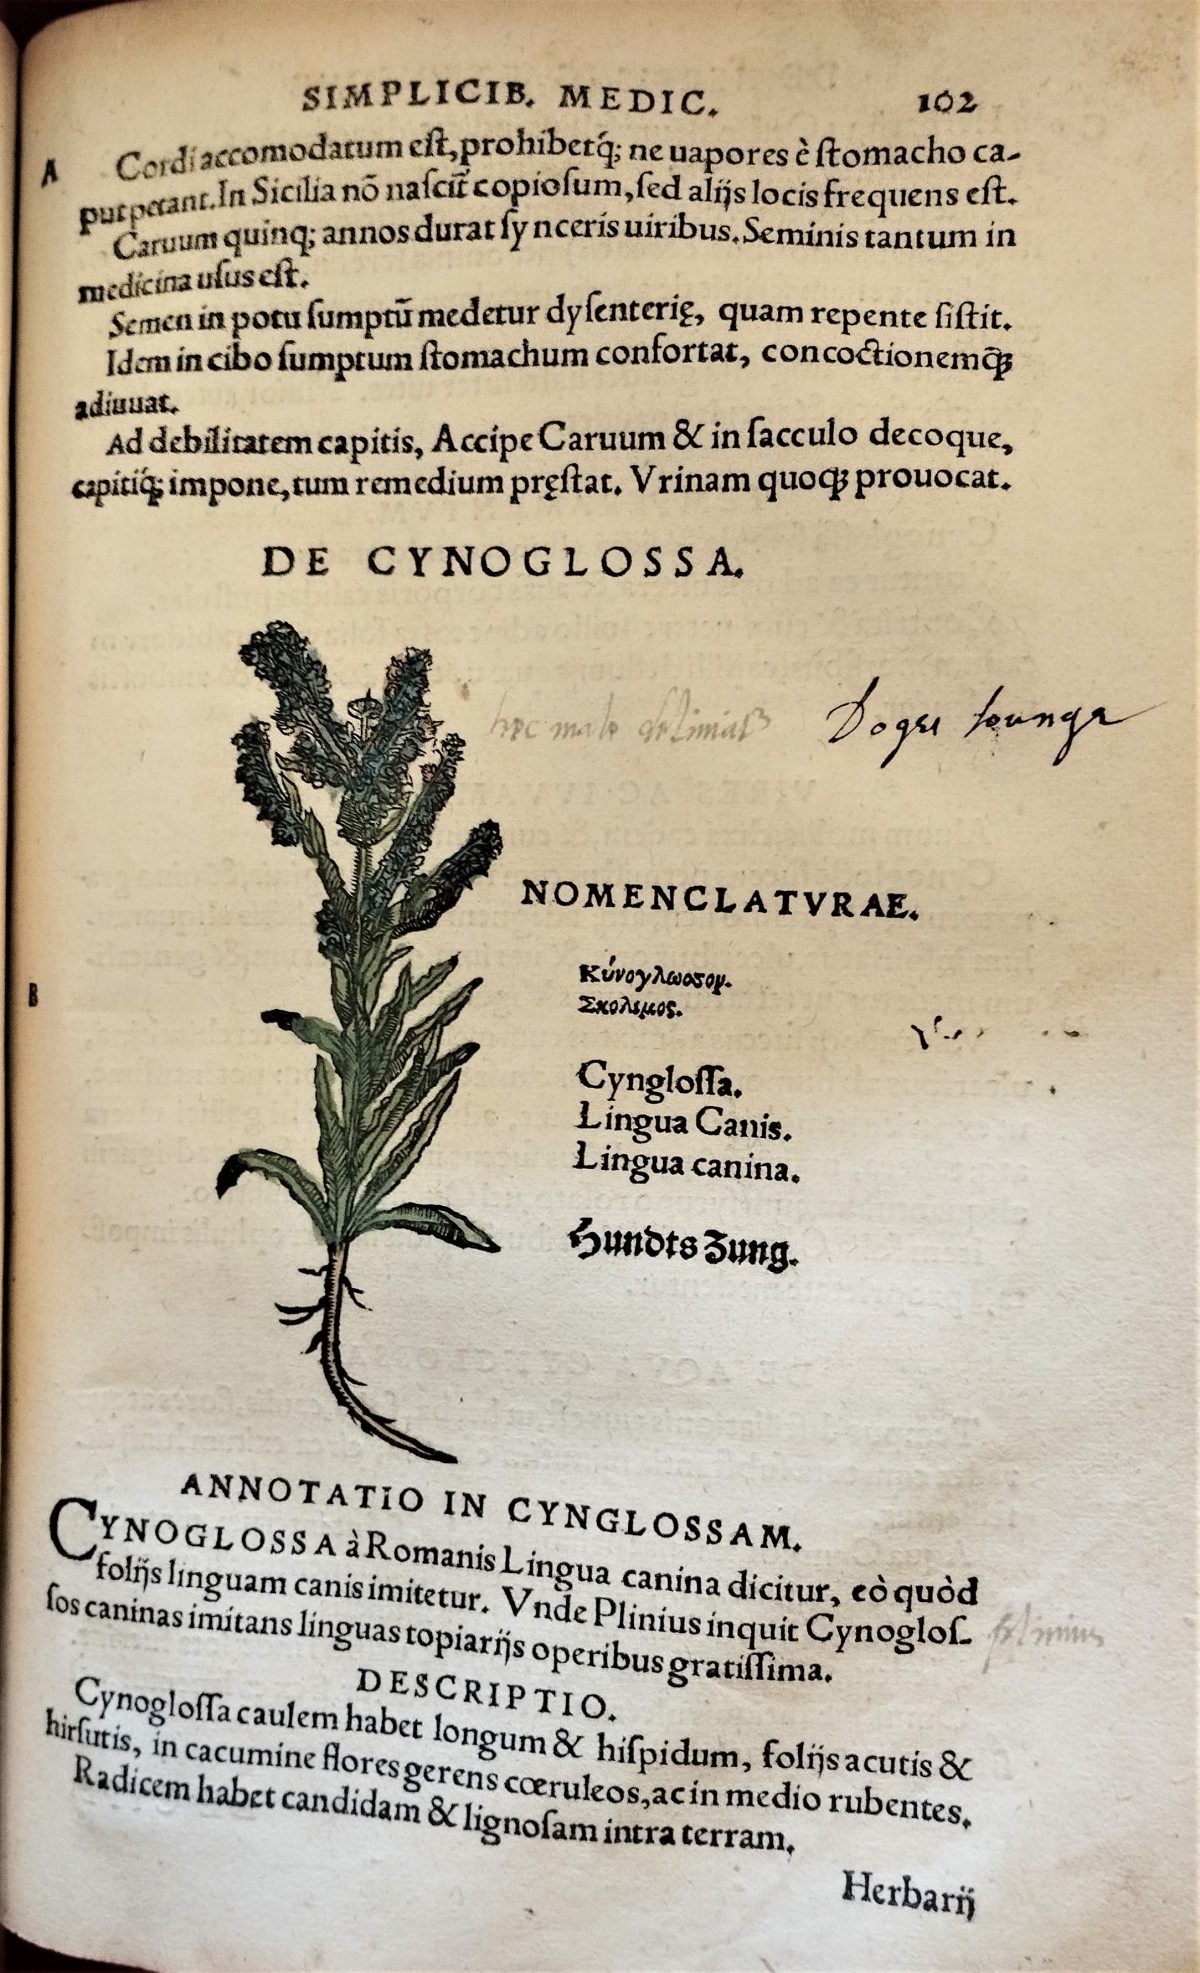 Page with the nomenclature, latin text description and hand painted illustration of the houndstongue plant and flowers.